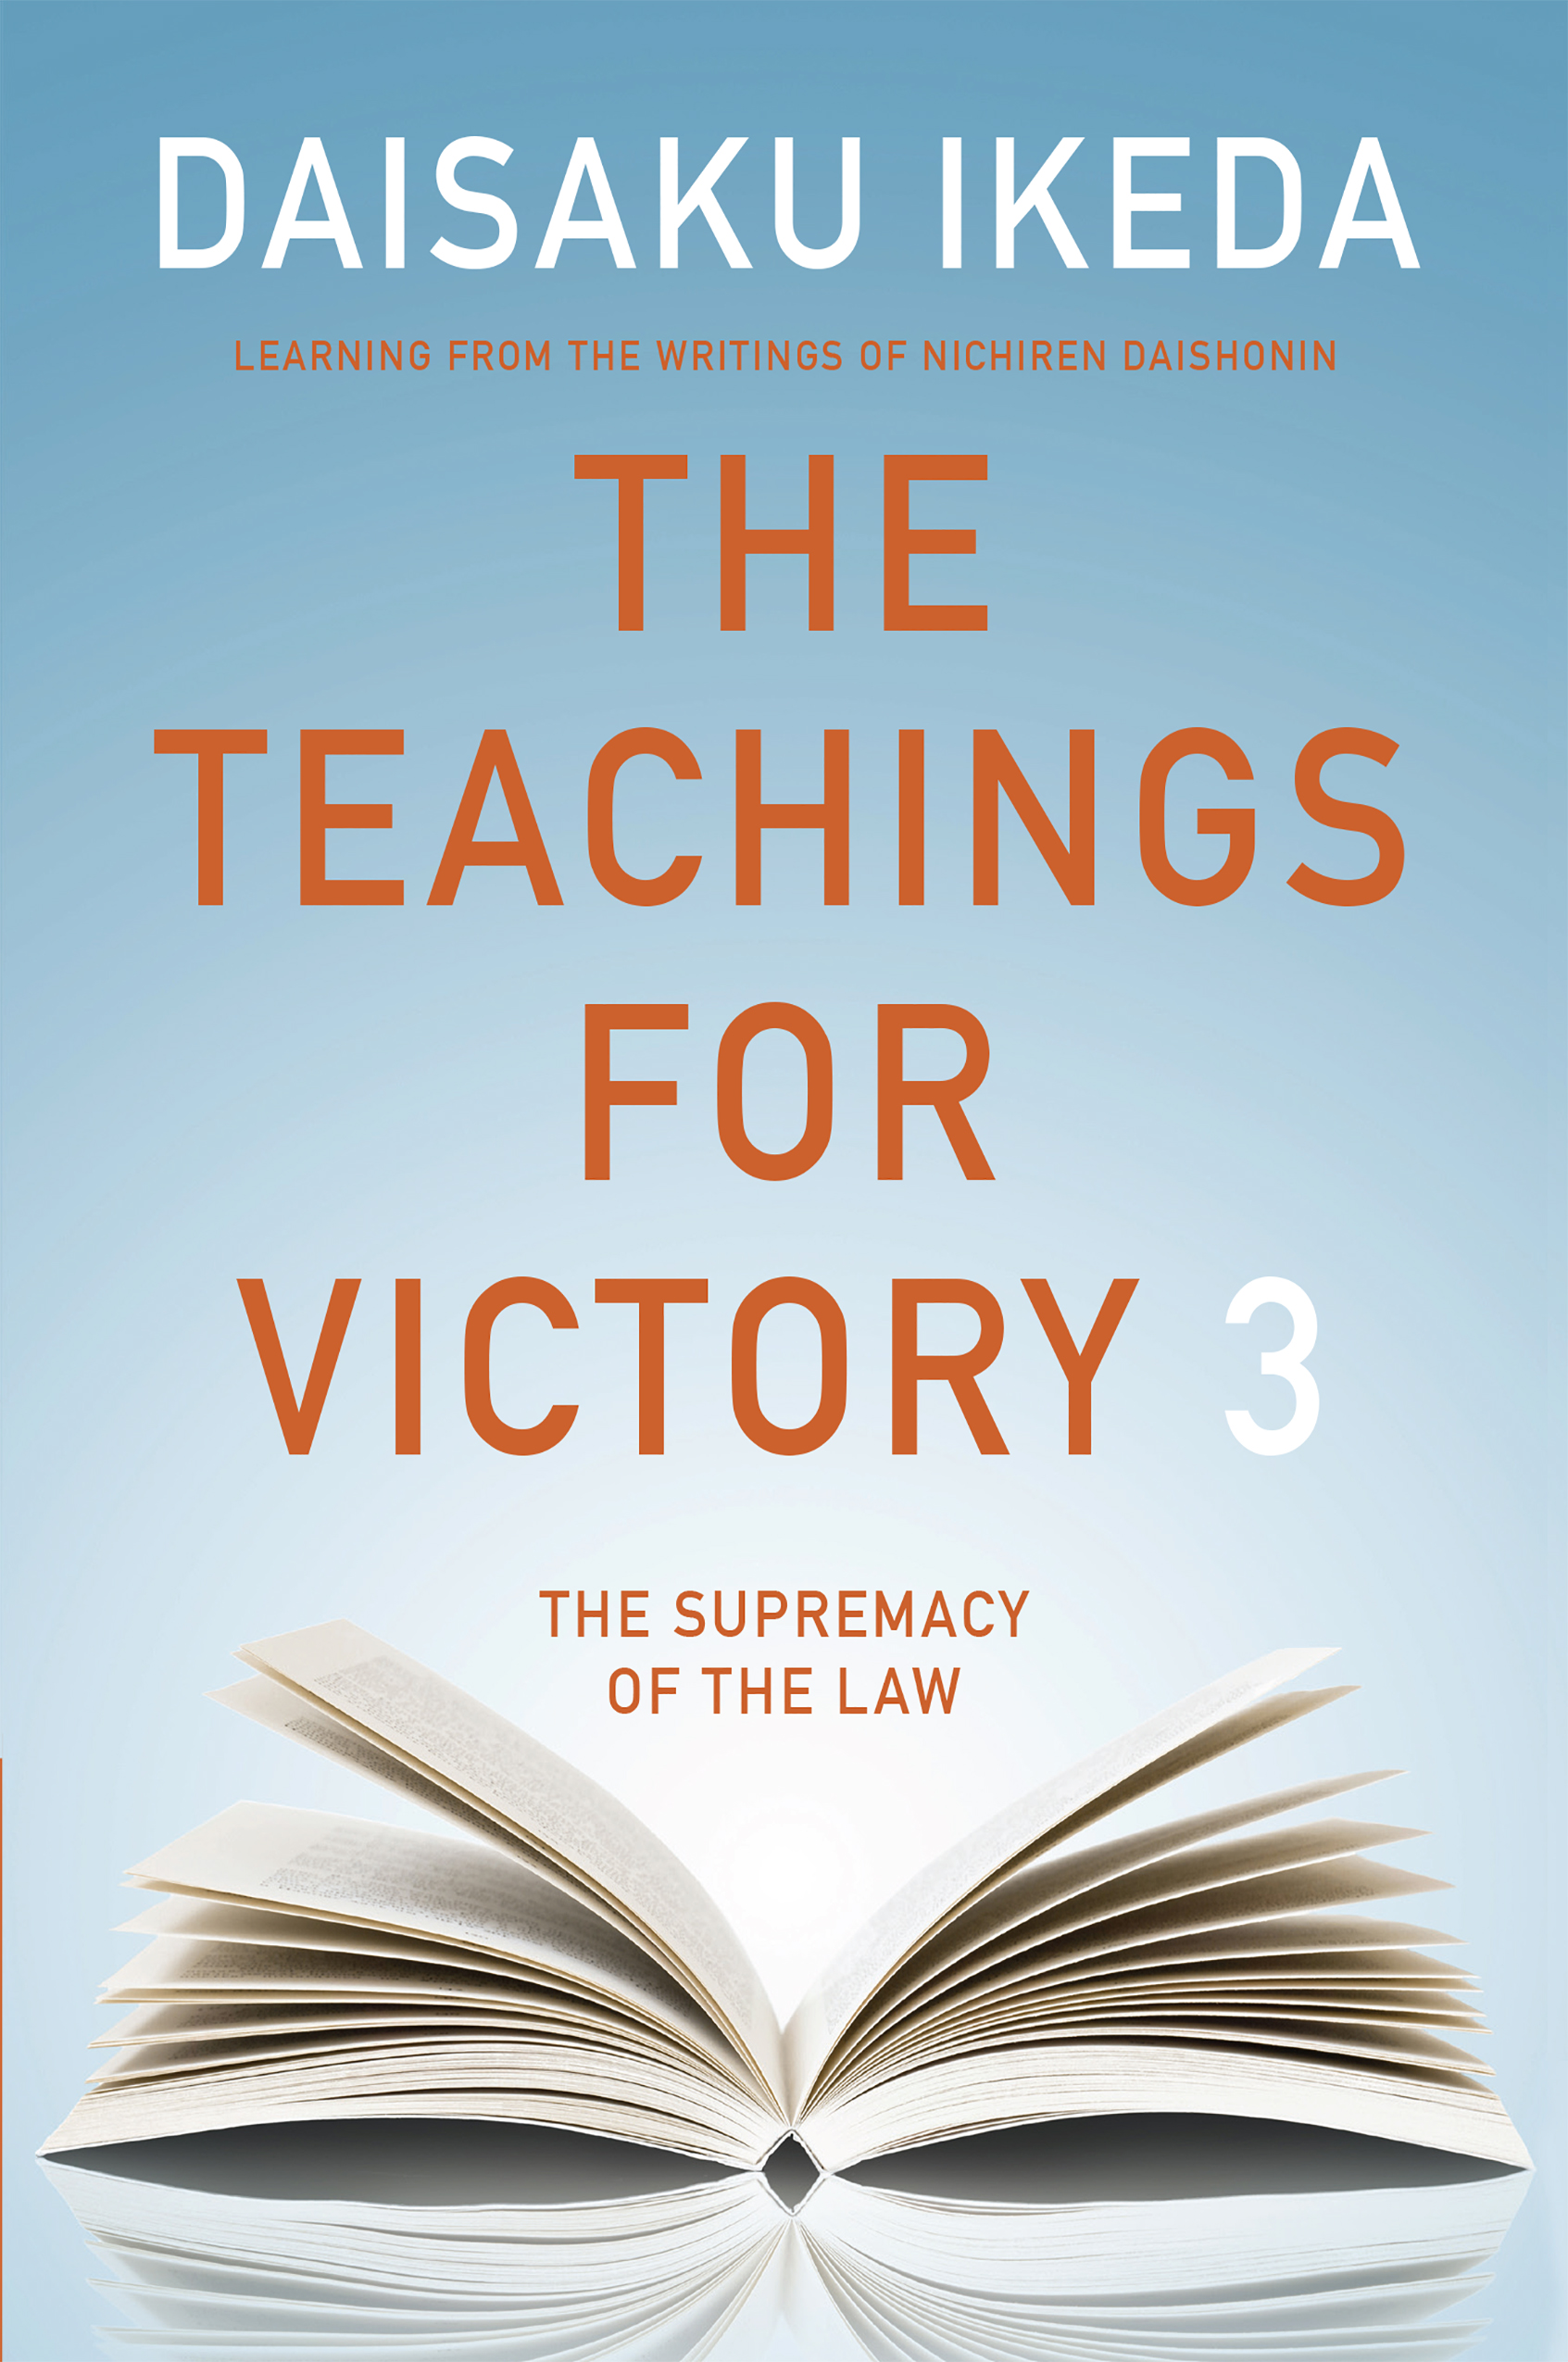 The Teaching for Victory Vol-3